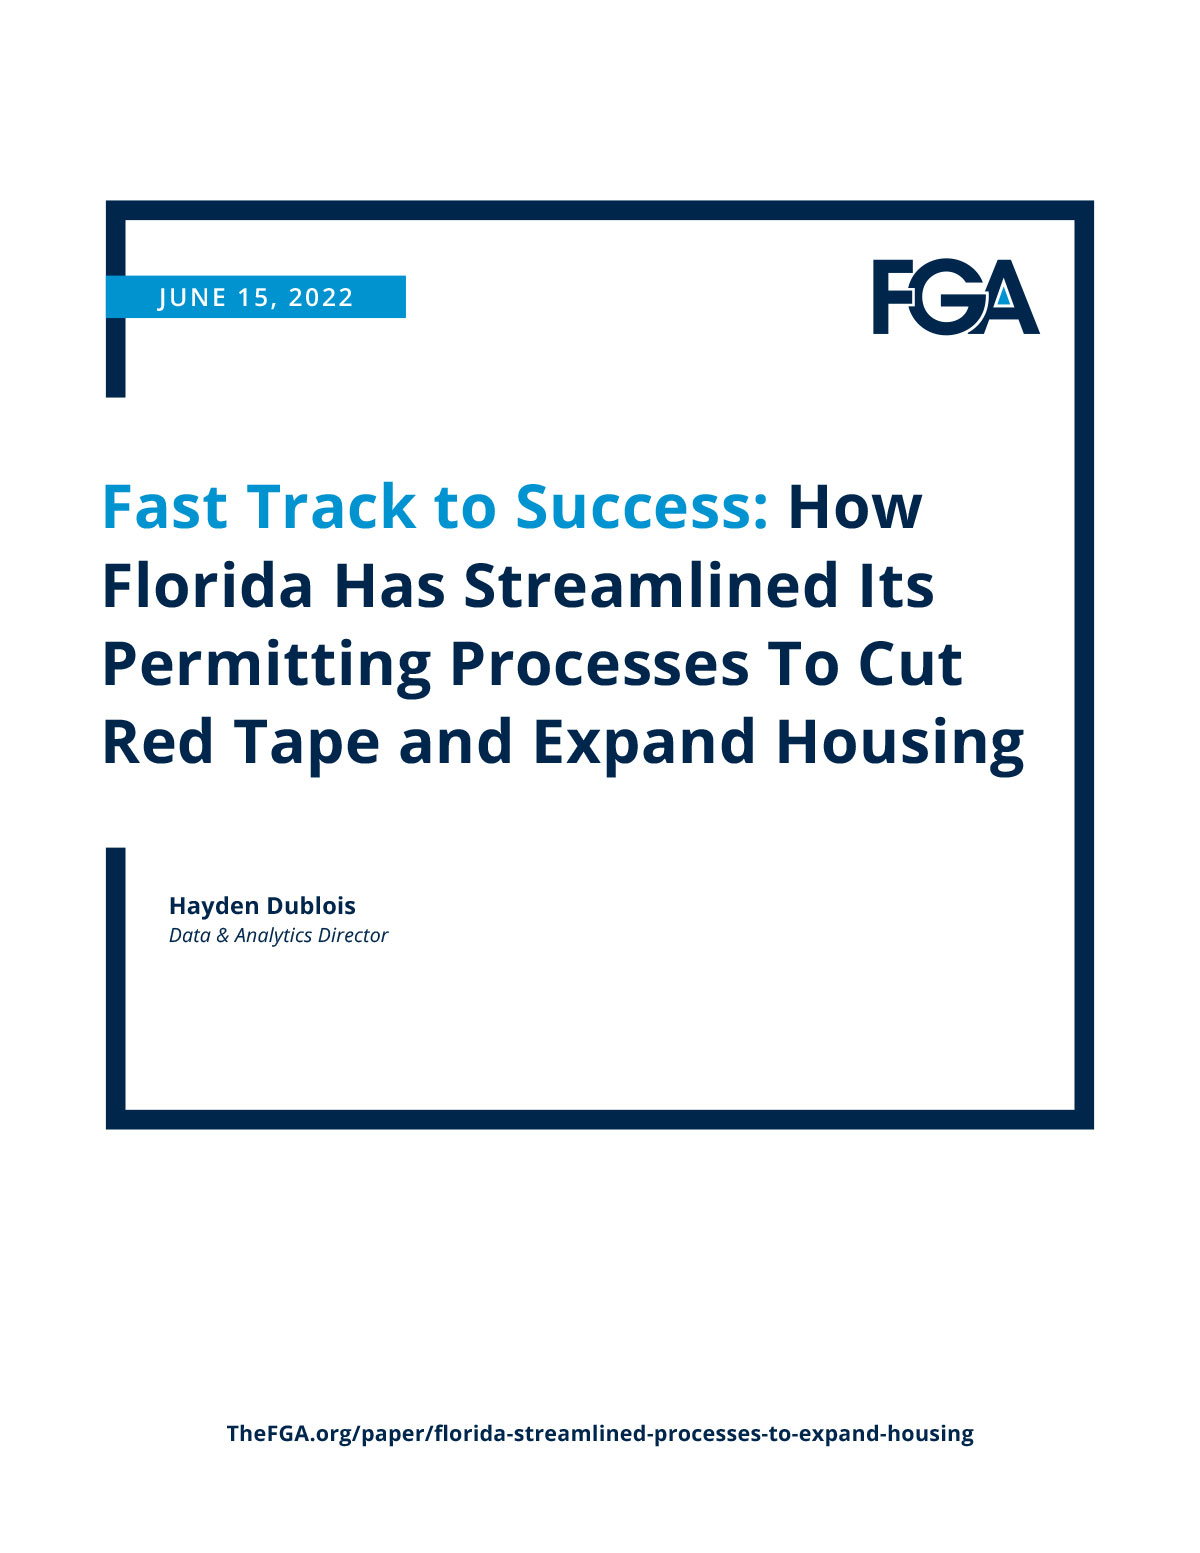 Fast Track to Success: How Florida Has Streamlined Its Permitting Processes To Cut Red Tape and Expand Housing